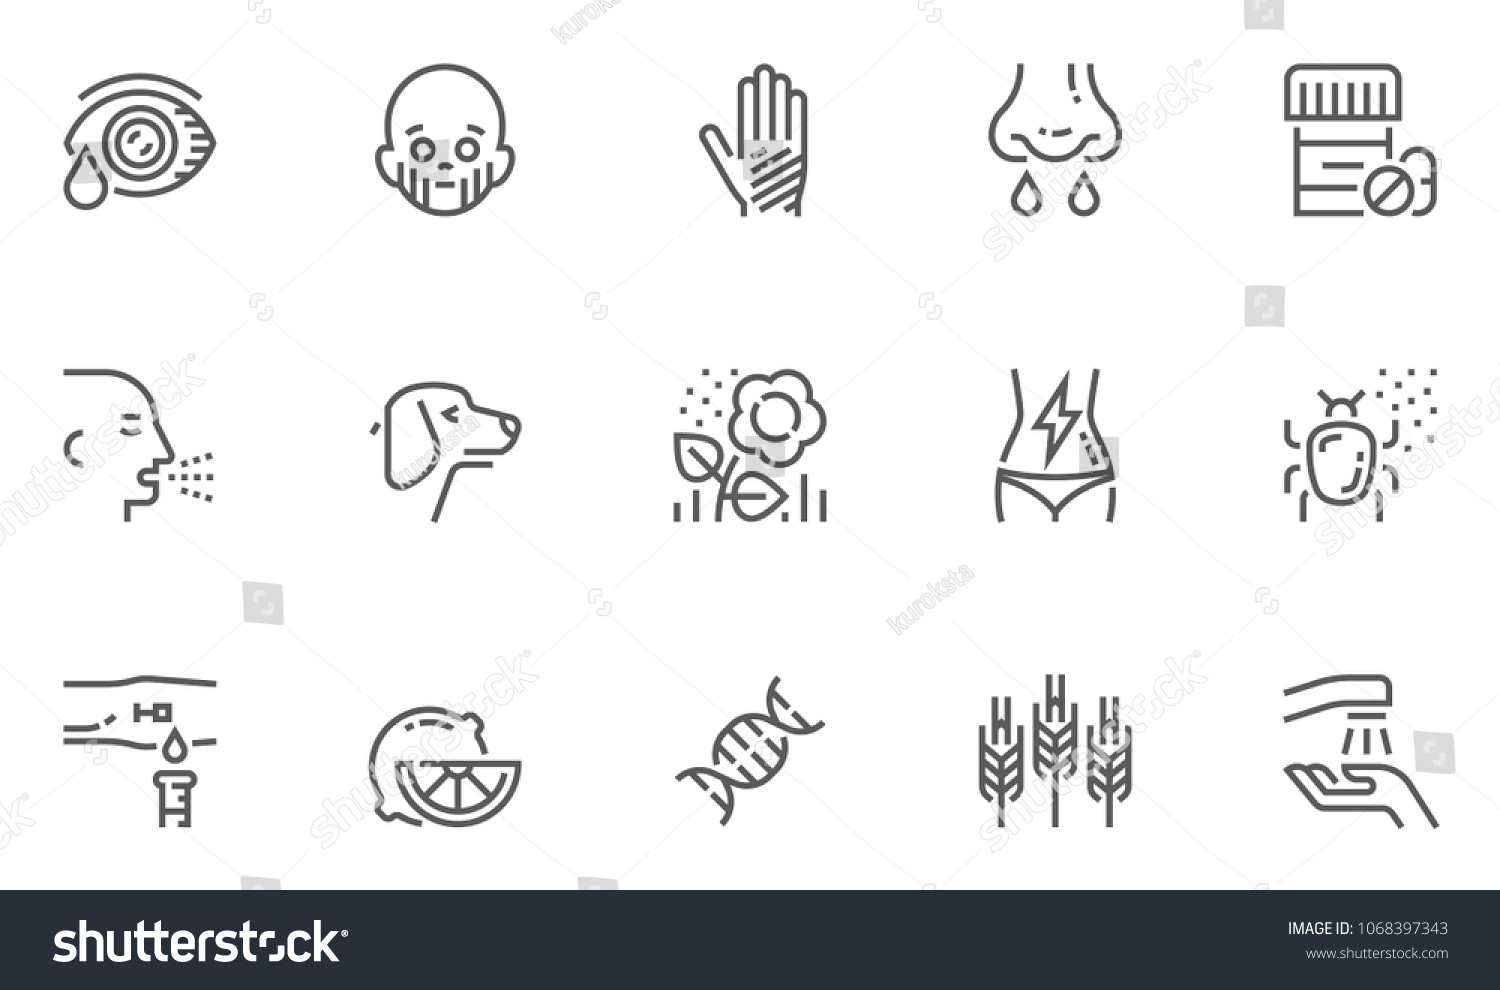 Allergy and Allergens Vector Line Icons Set. Allergy to Animal Hair, Food and Pollen, Skin Itching, Increased Lacrimation. Editable Stroke. 48x48 Pixel Perfect. #1068397343